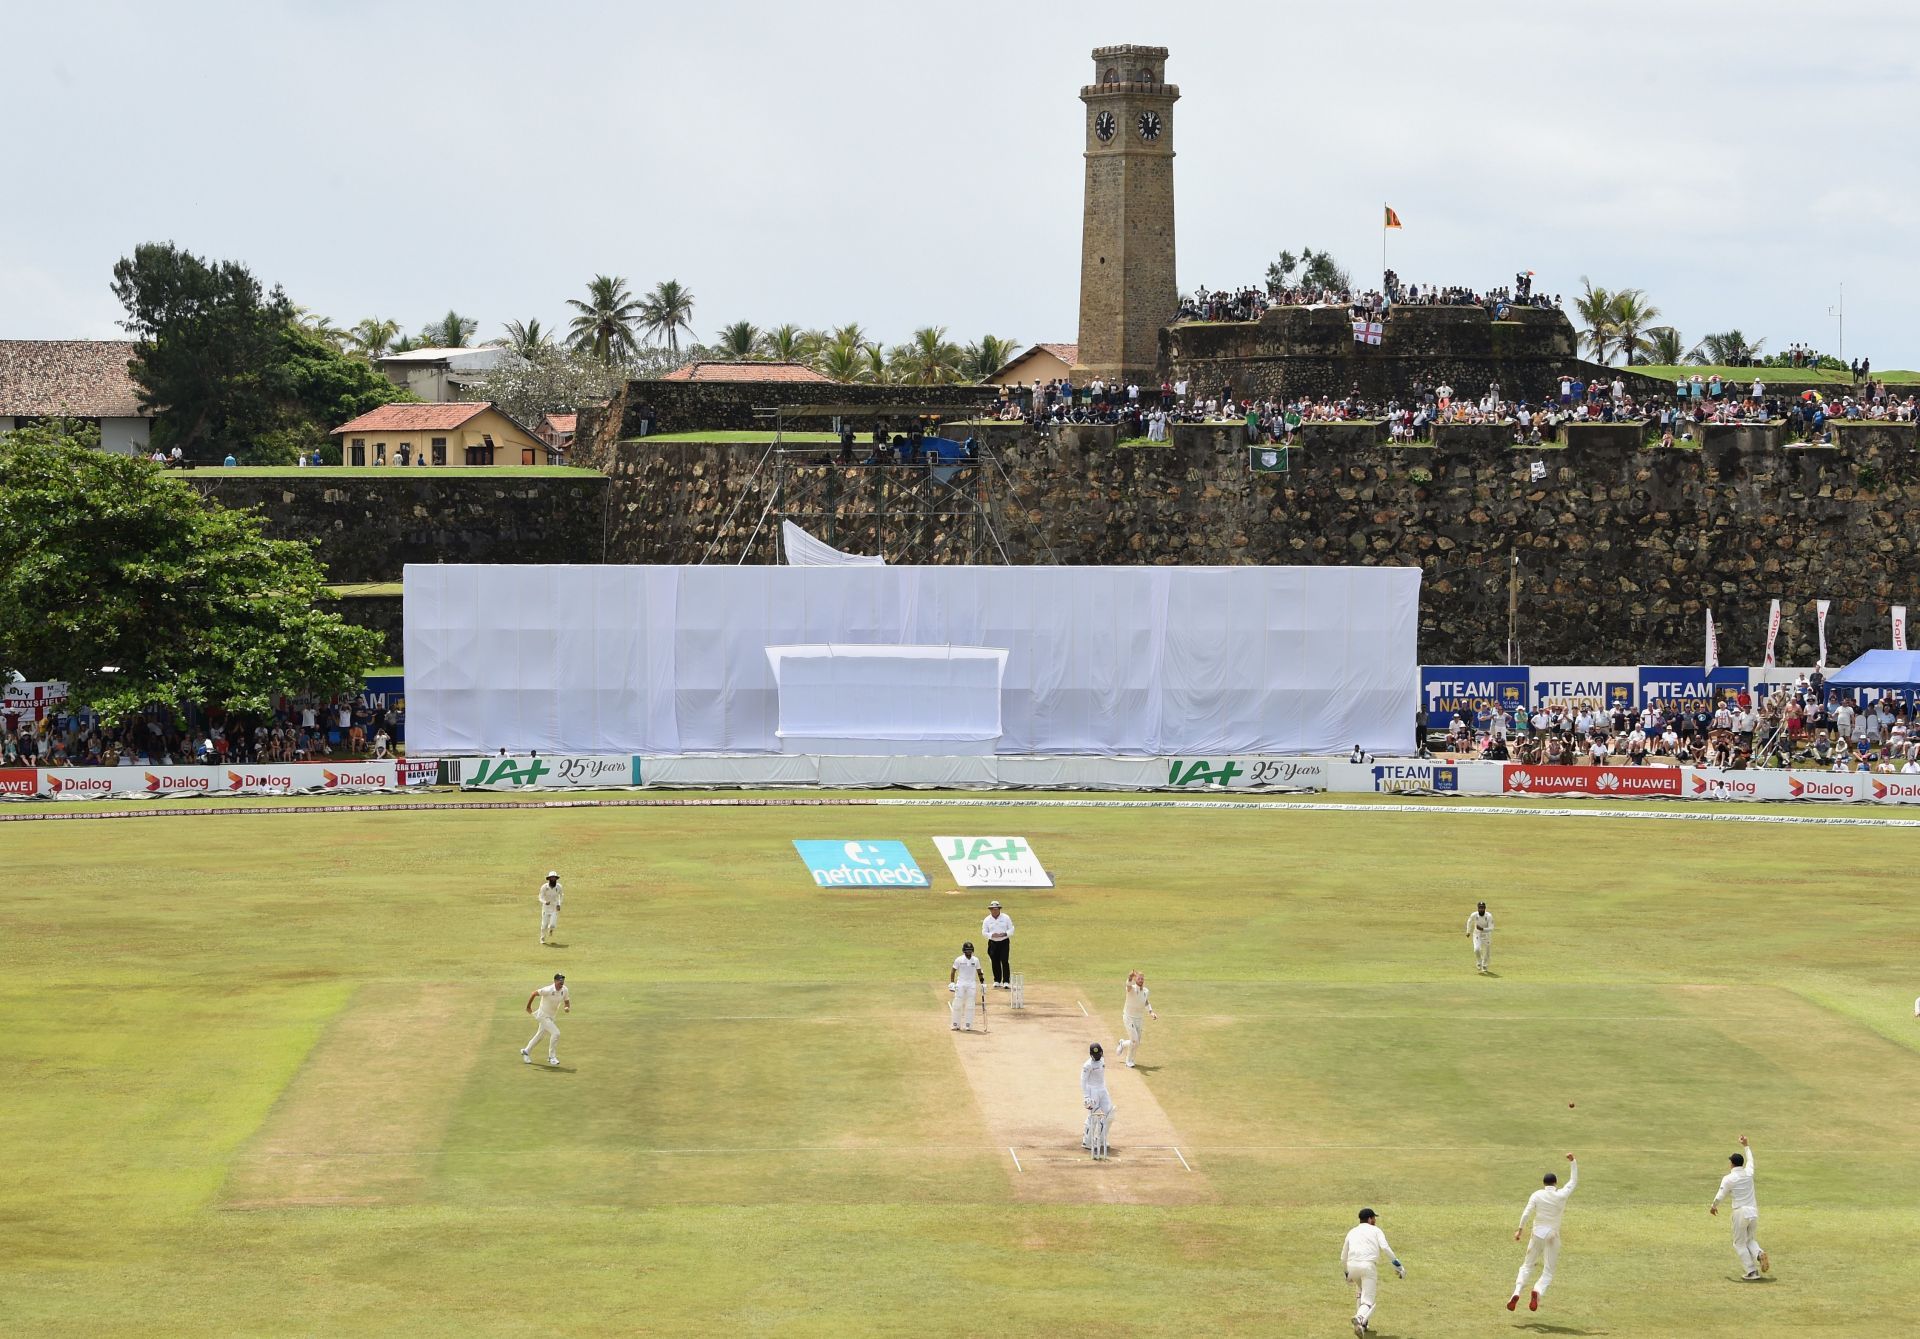 Action during a Test match in Galle, Sri Lanka, in early 2021